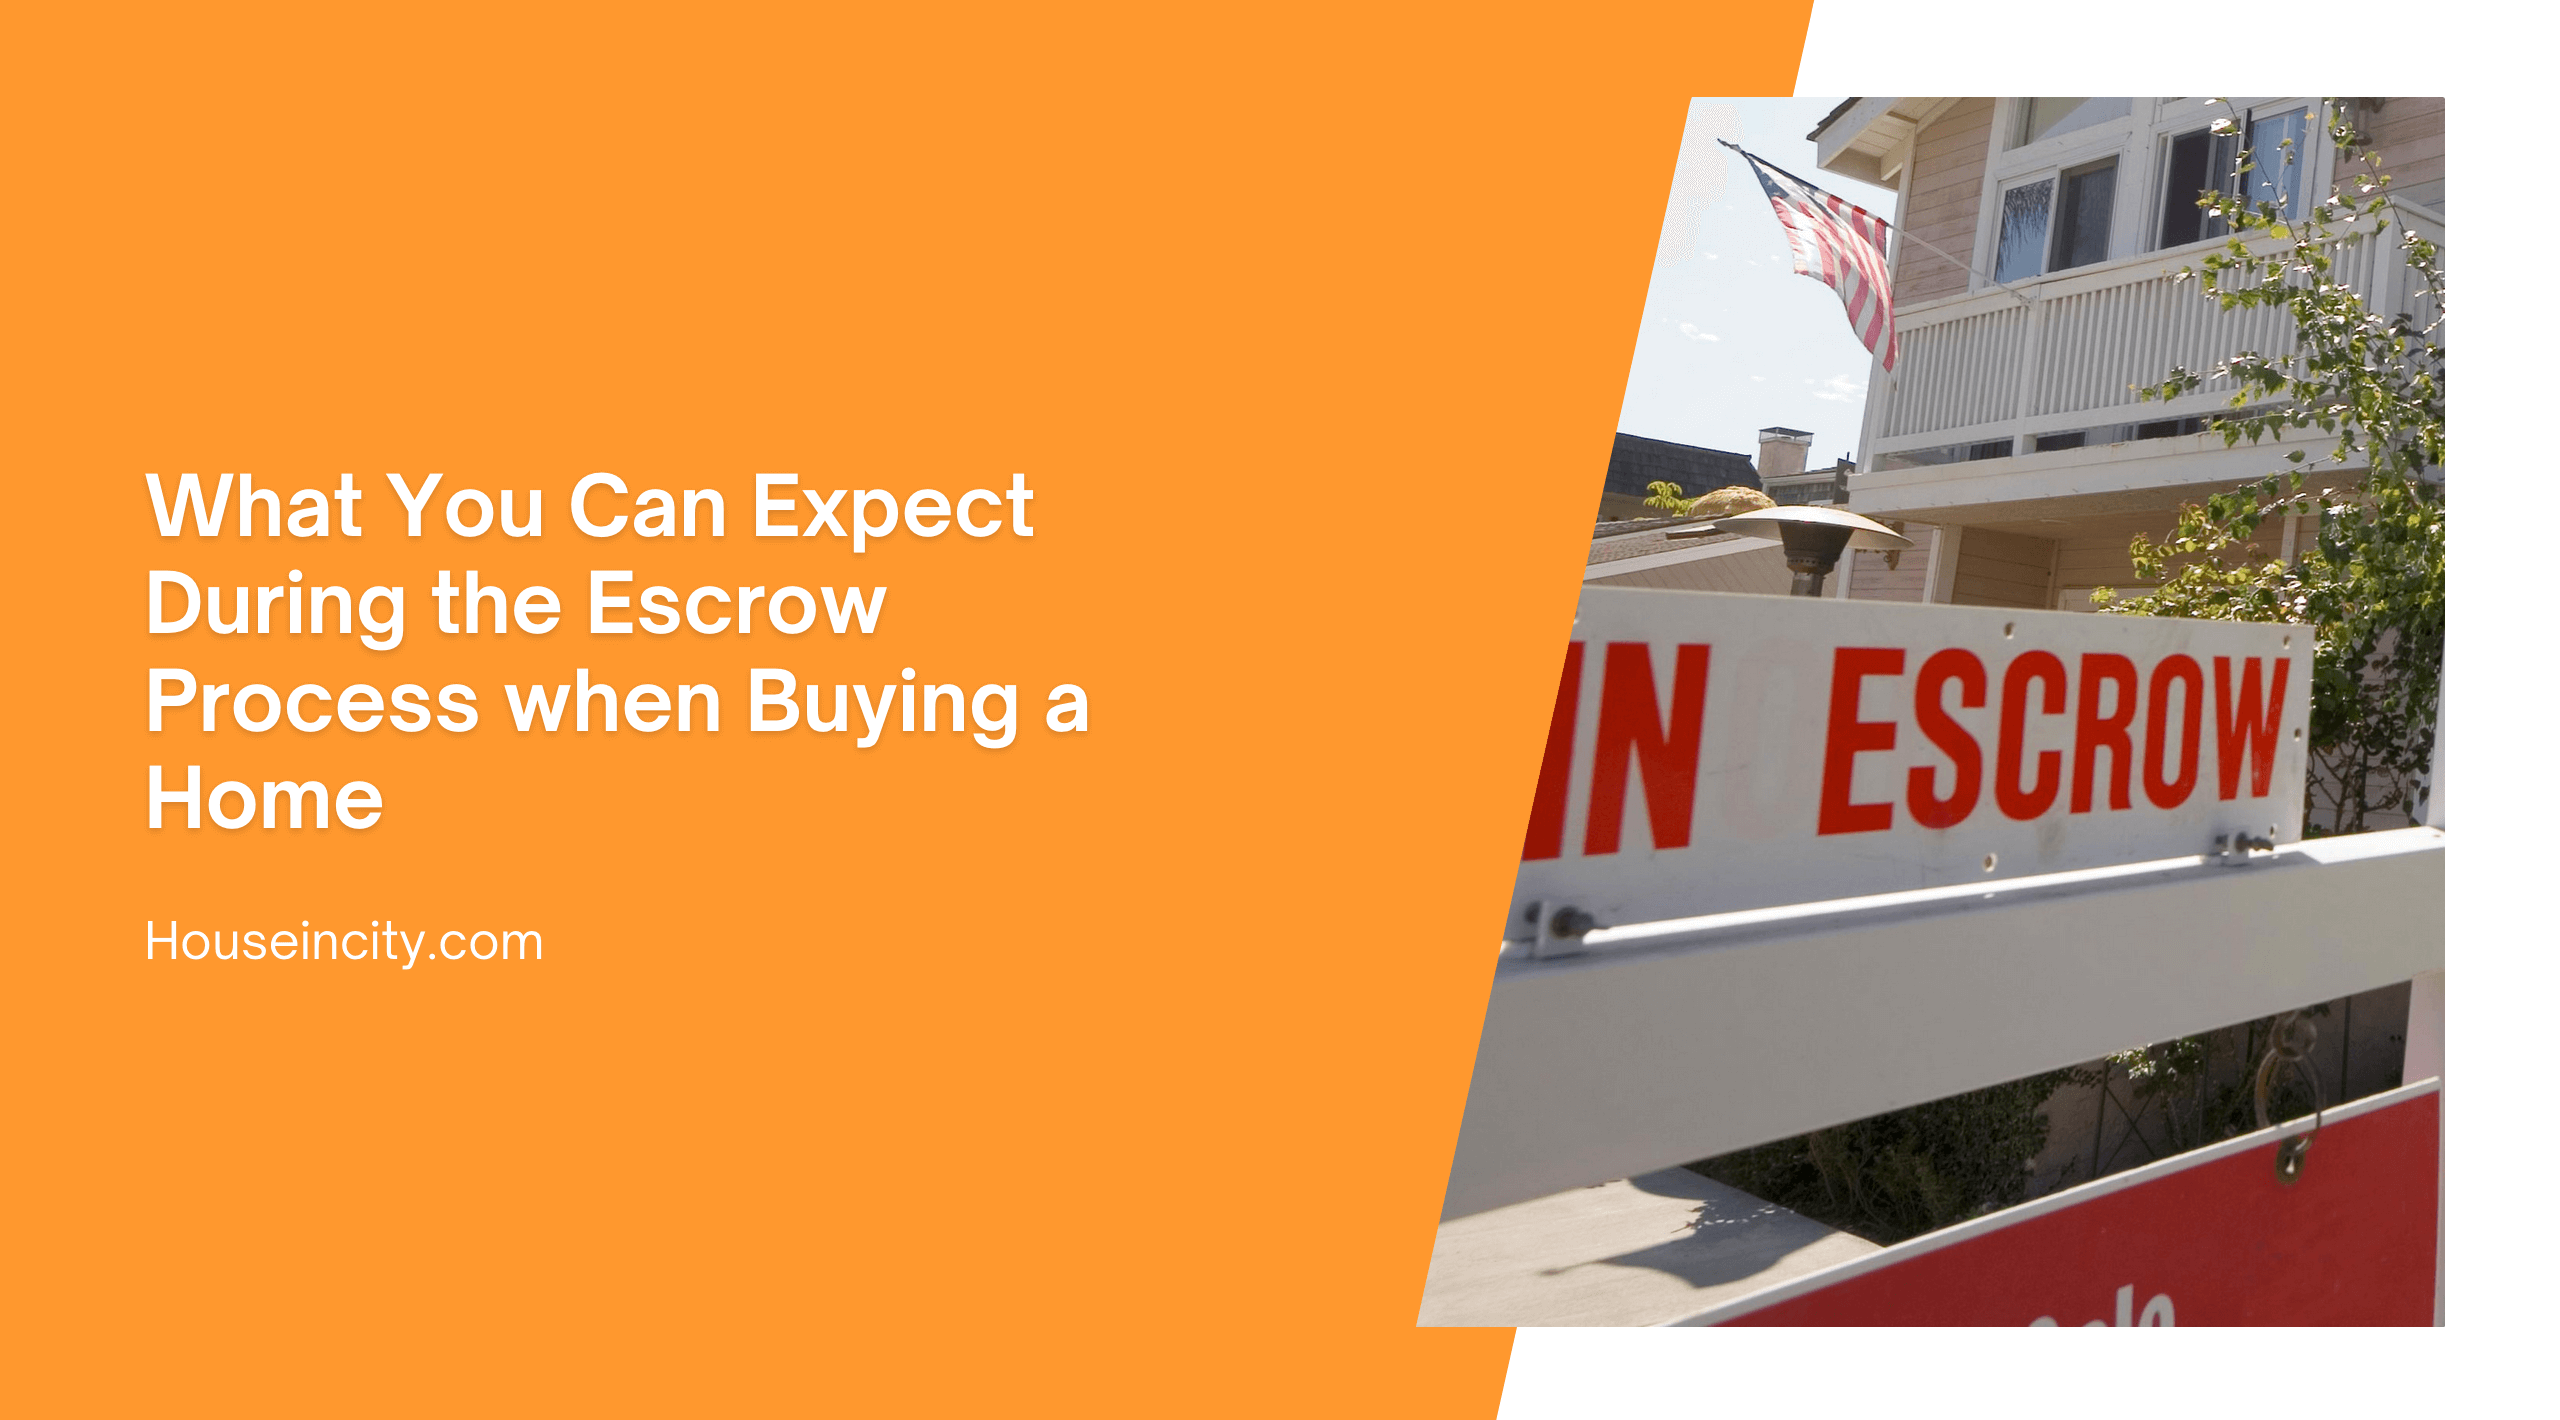 What You Can Expect During the Escrow Process when Buying a Home